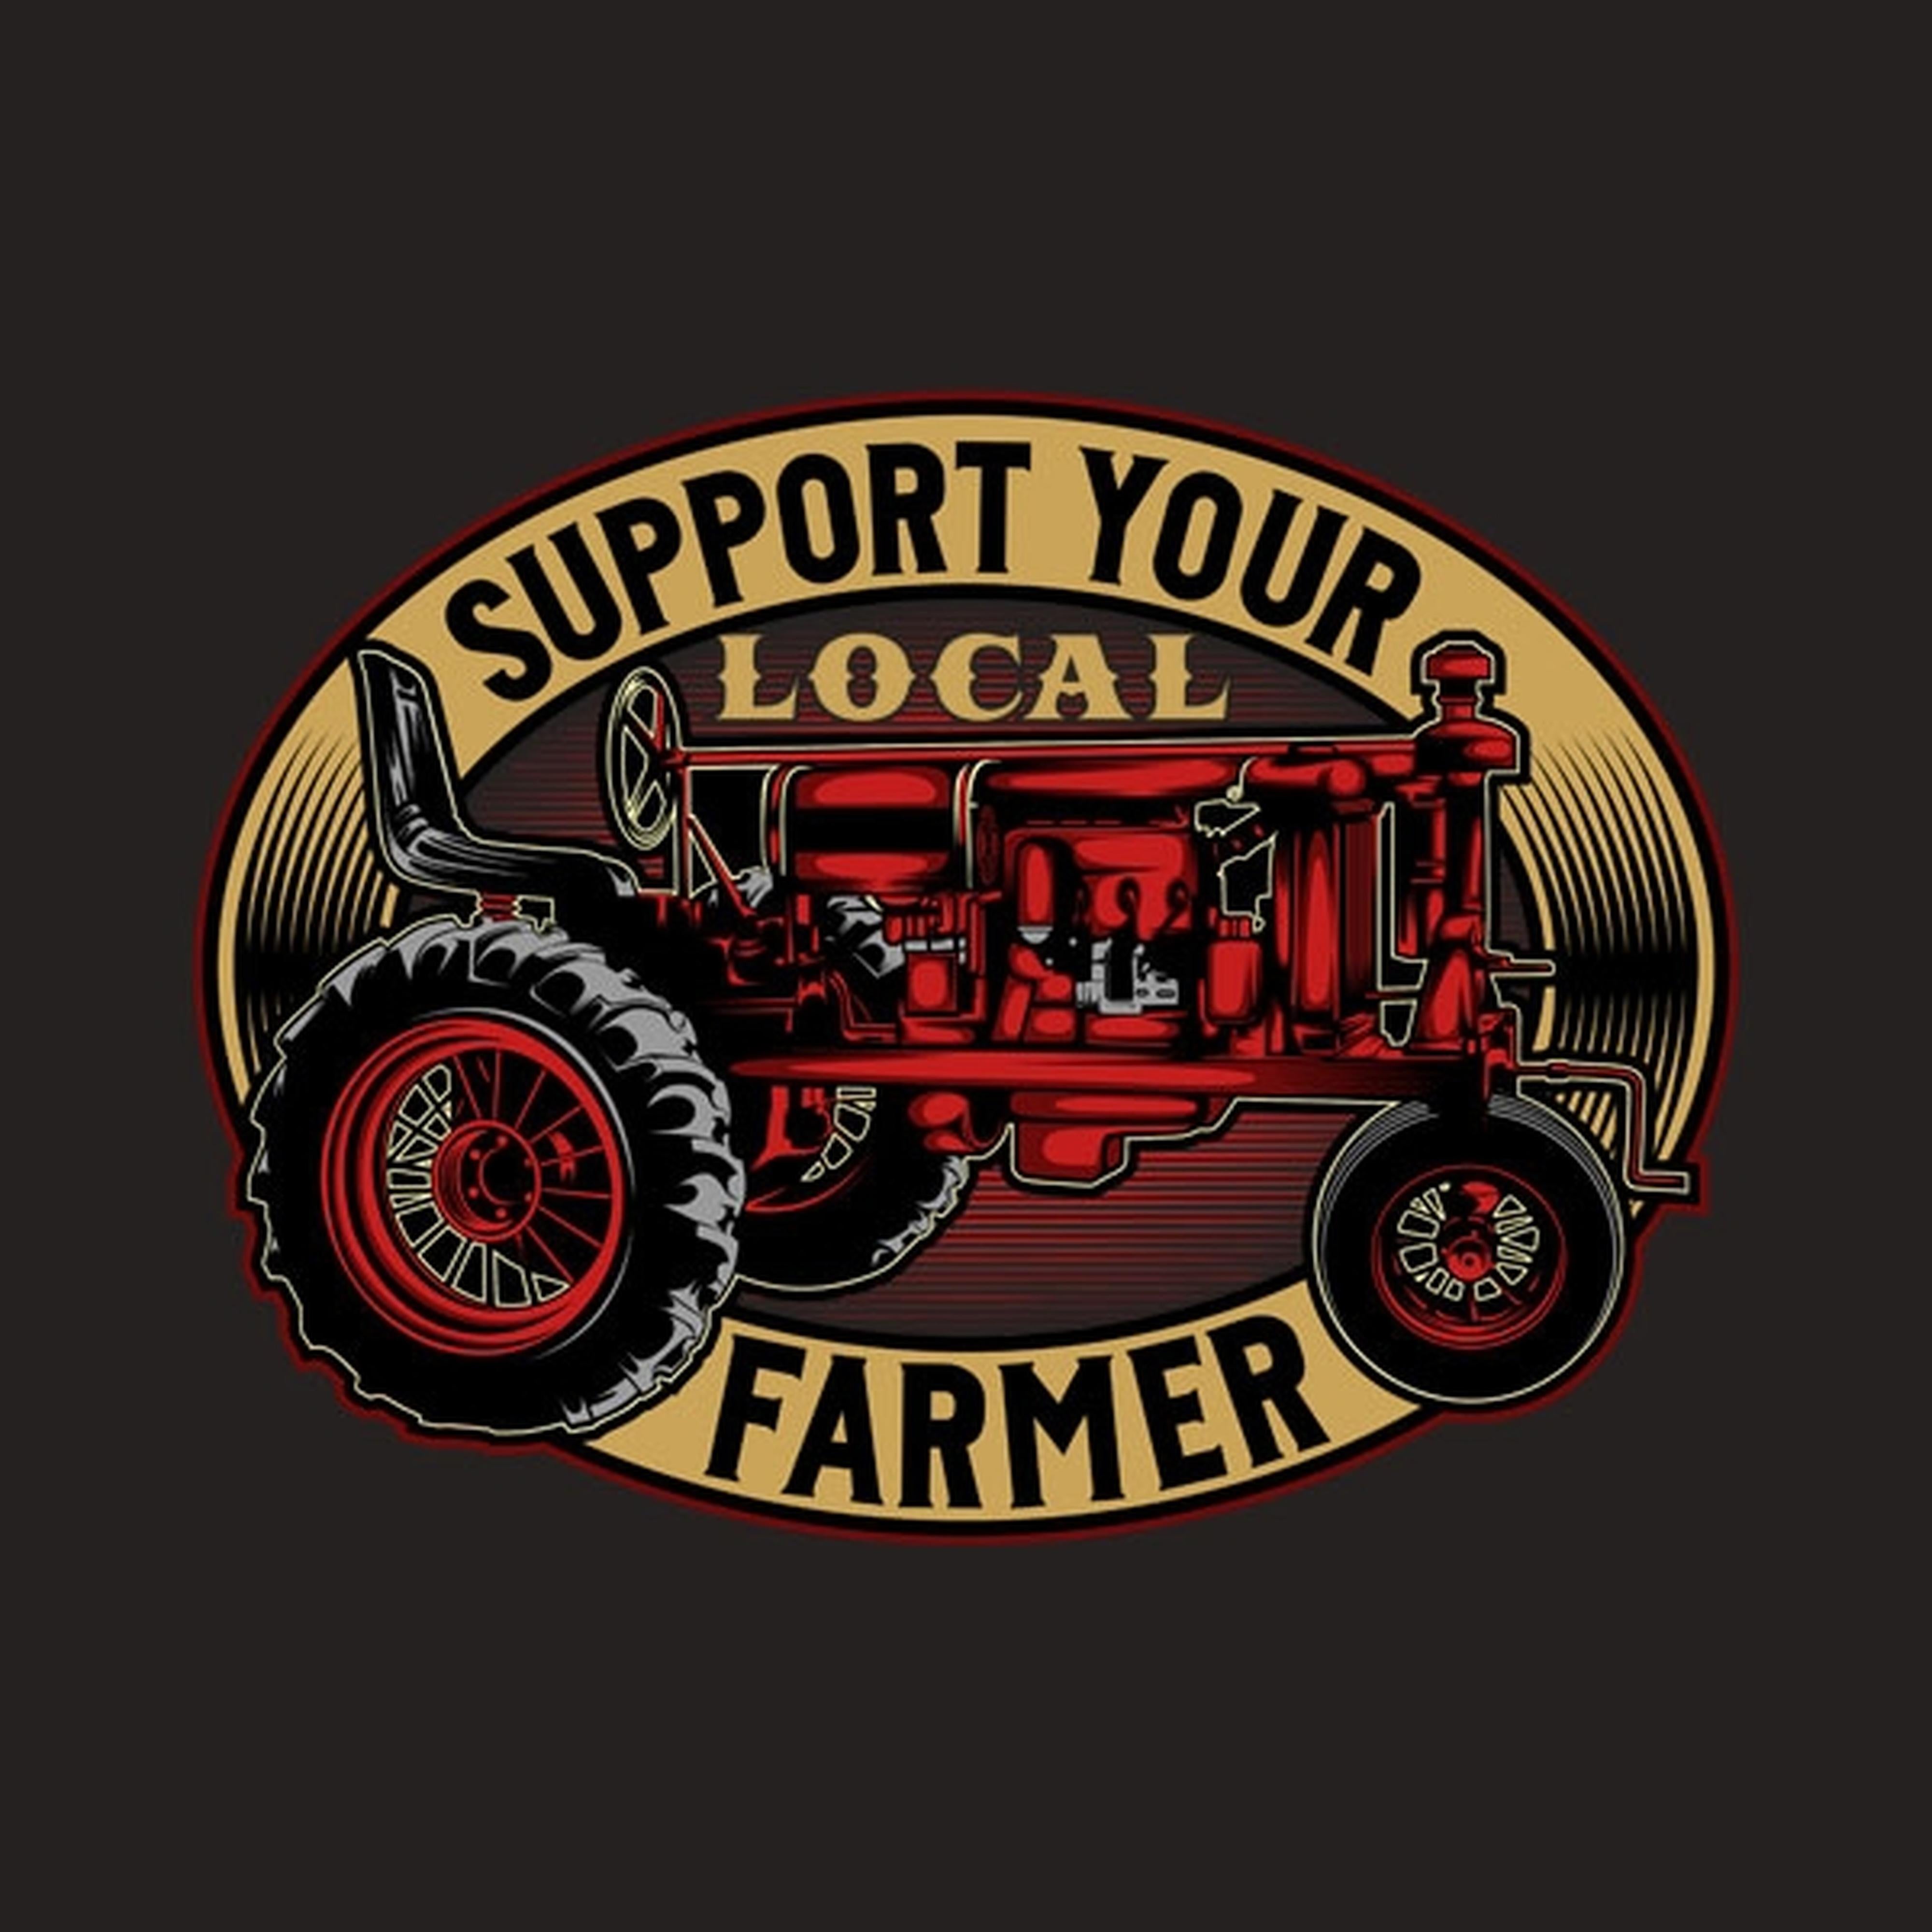 Support your local farmer - T-shirt